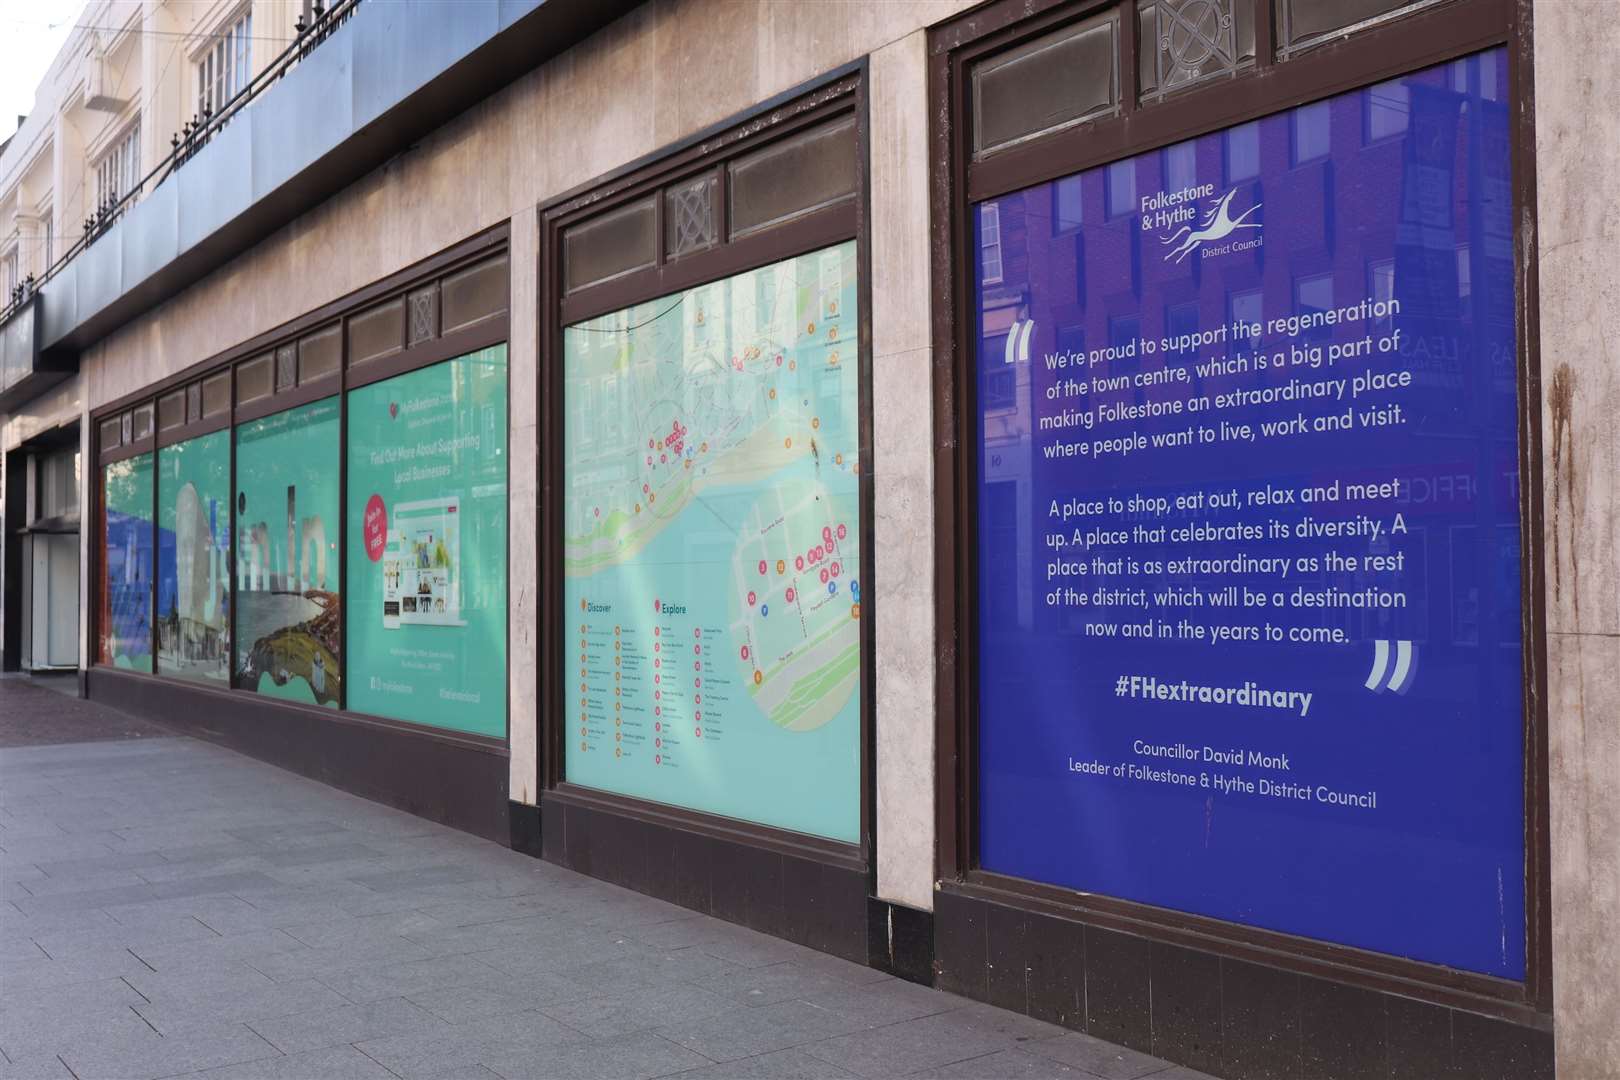 After the store closed in January, a vinyl wrap was installed in the windows to promote Folkestone